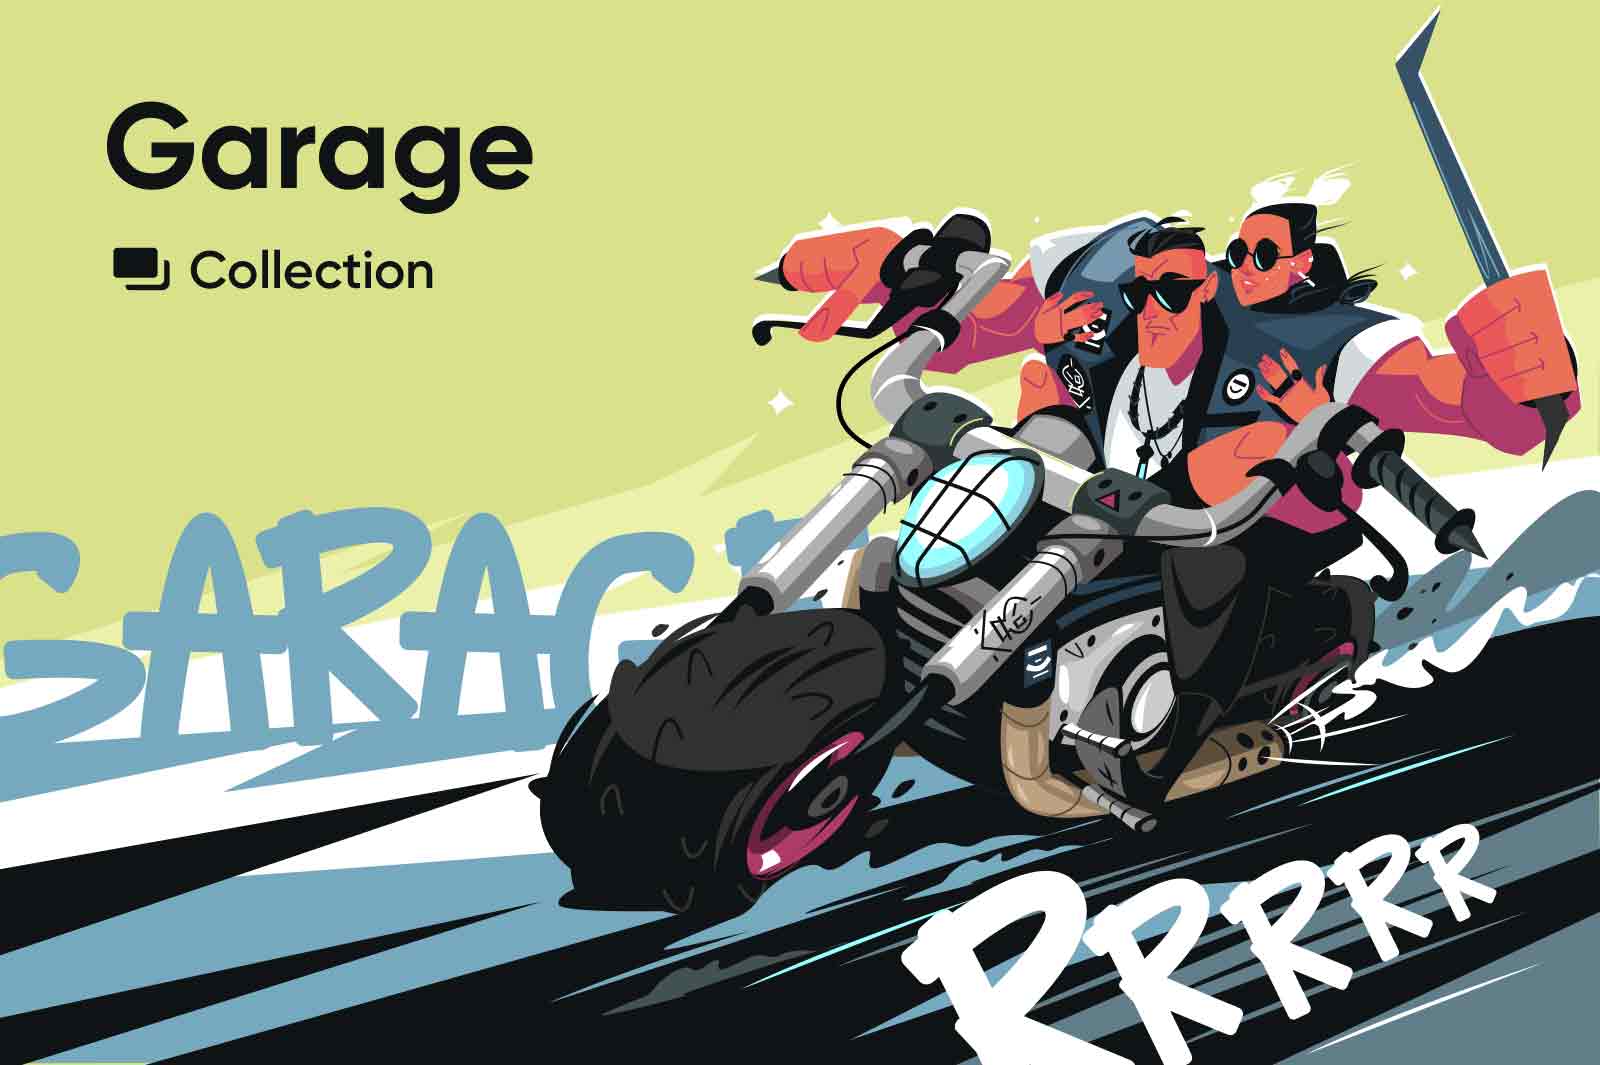 Garage is a short series of vector illustrations about motobiker's life.